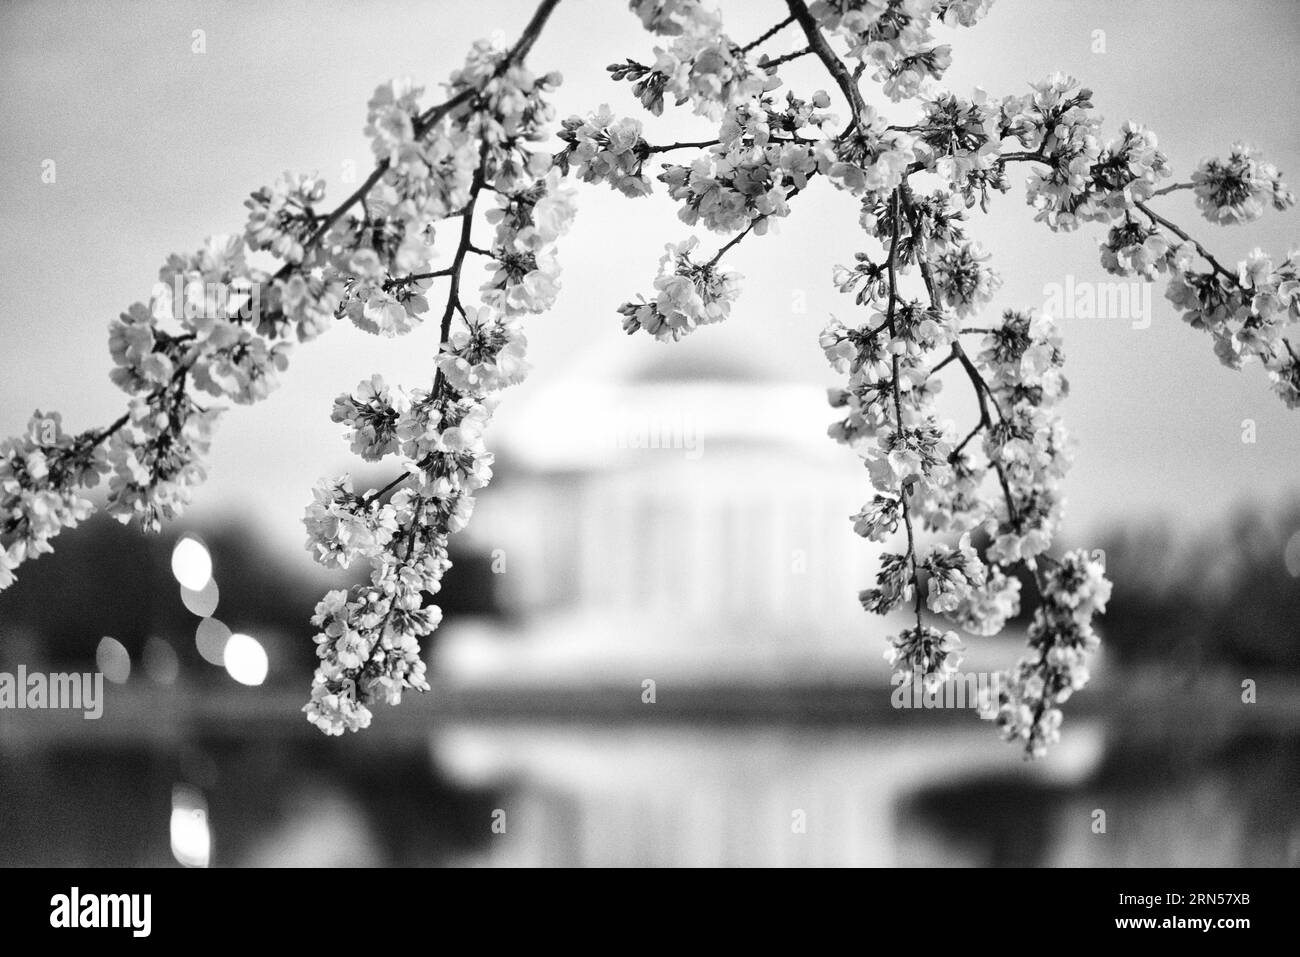 WASHINGTON DC, United States — A black and white photograph of Washington DC's famous cherry blossoms. Each spring, cherry blossoms in full bloom envelope the Tidal Basin, marking the onset of spring in the nation's capital. This annual event draws thousands, symbolizing the enduring friendship between the U.S. and Japan, a gift from Tokyo in 1912. Stock Photo